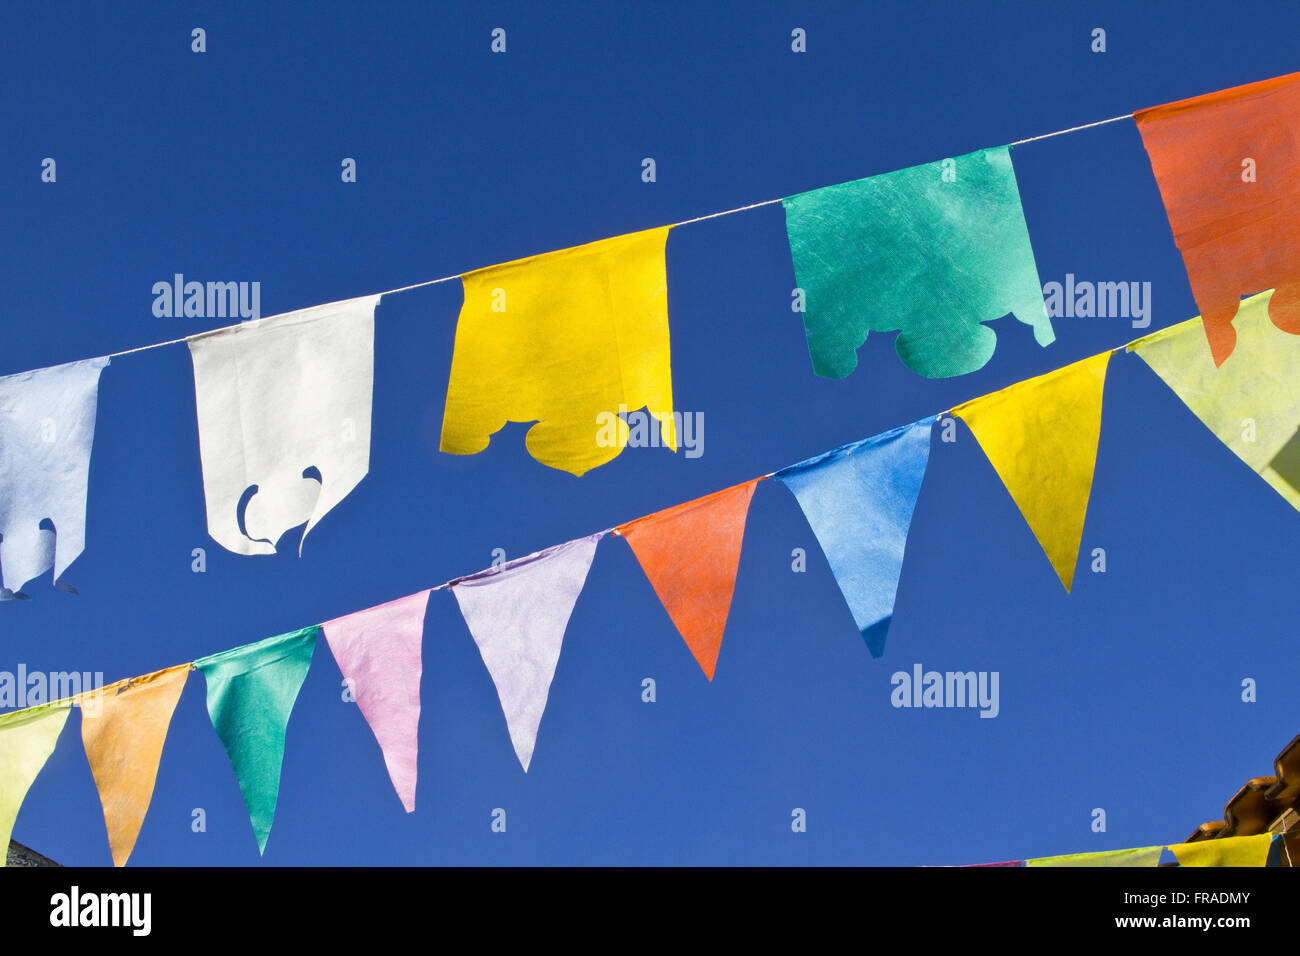 Pennants decorating the streets during religious festival Stock Photo